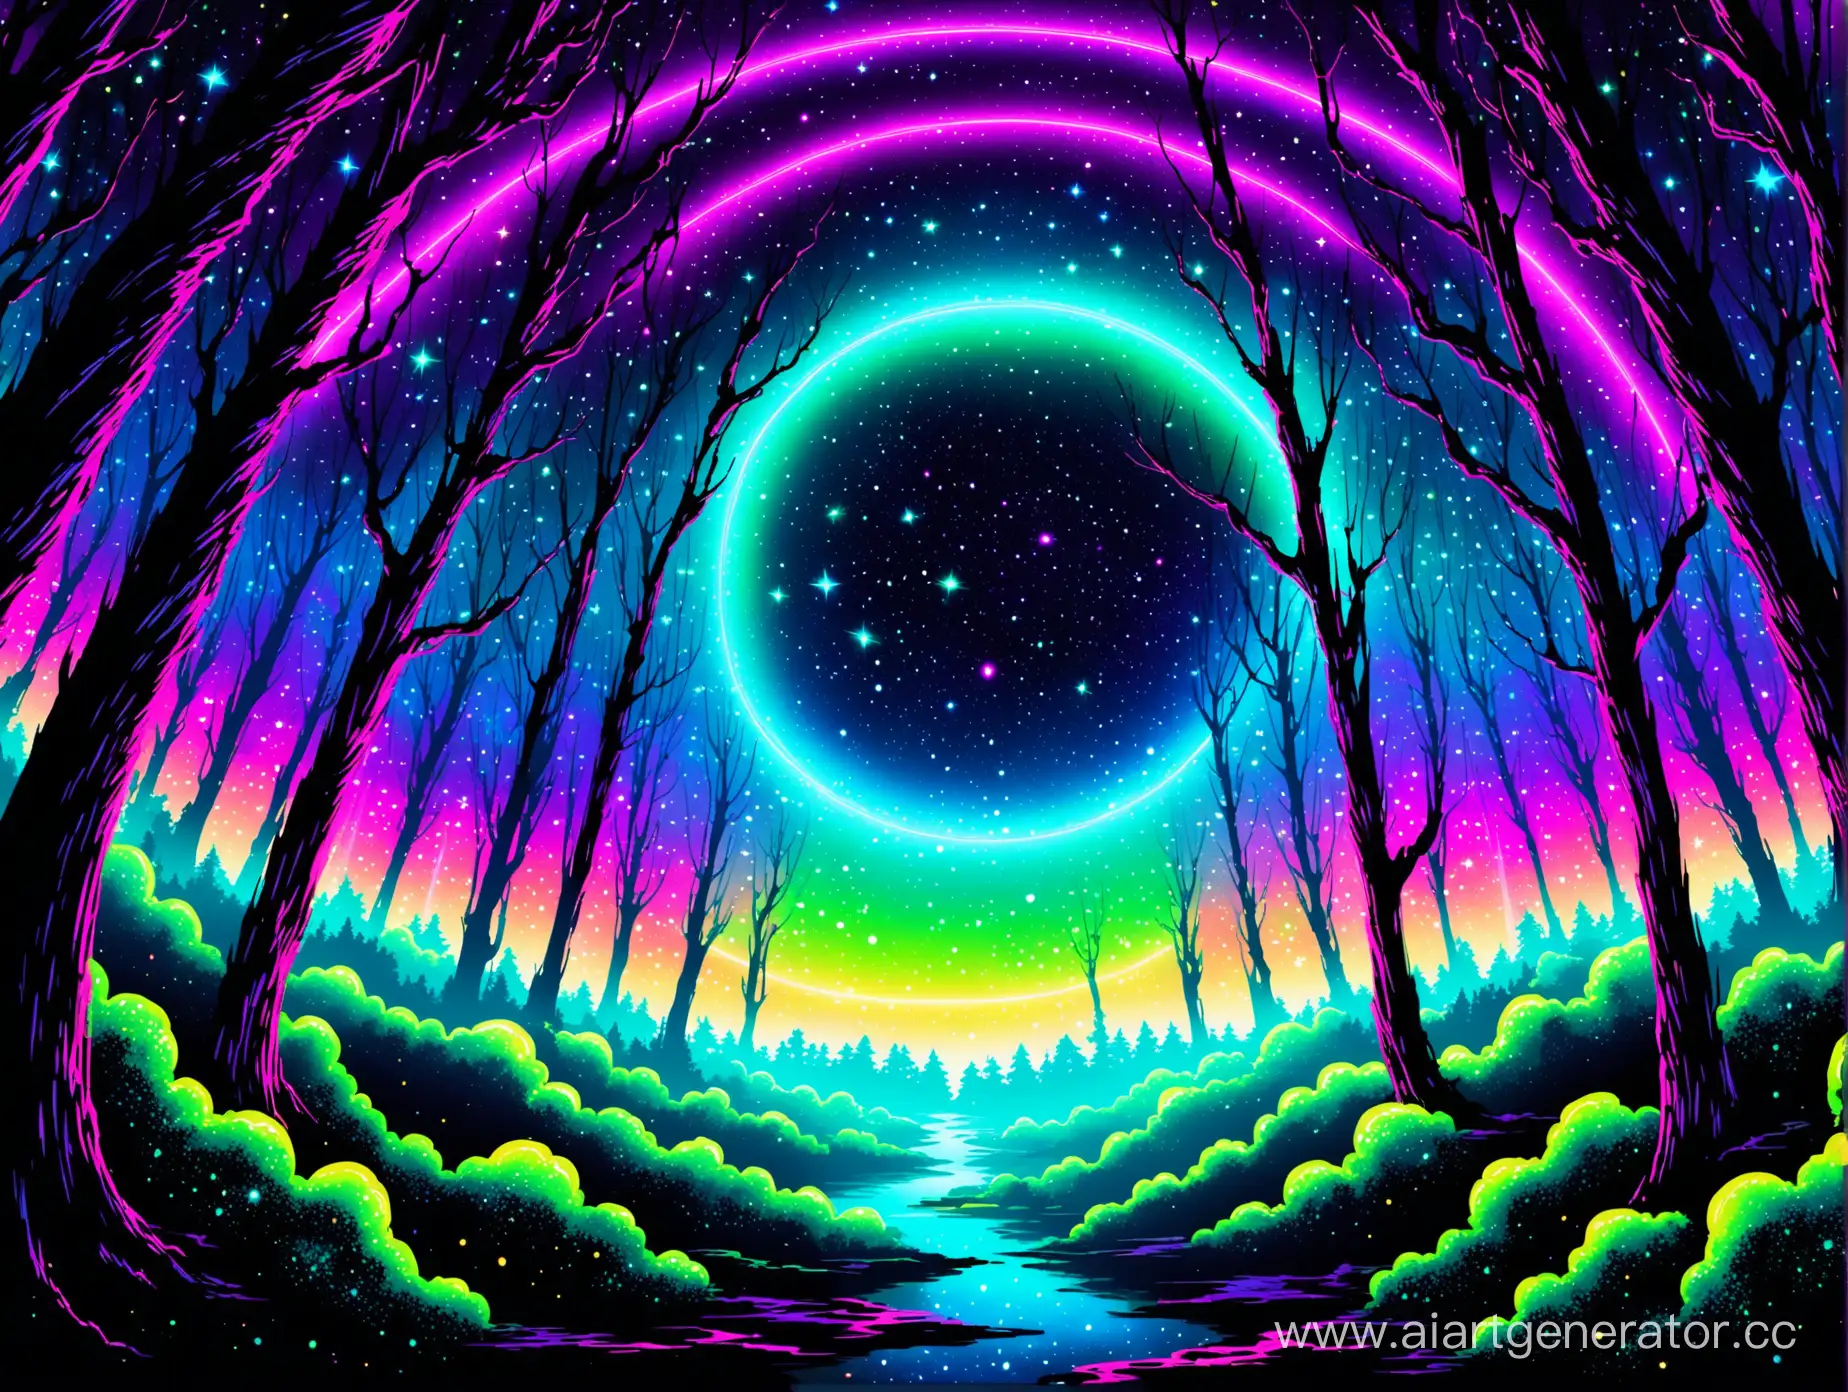 Cosmic-Neon-Space-with-Enchanted-Forest-Silhouettes